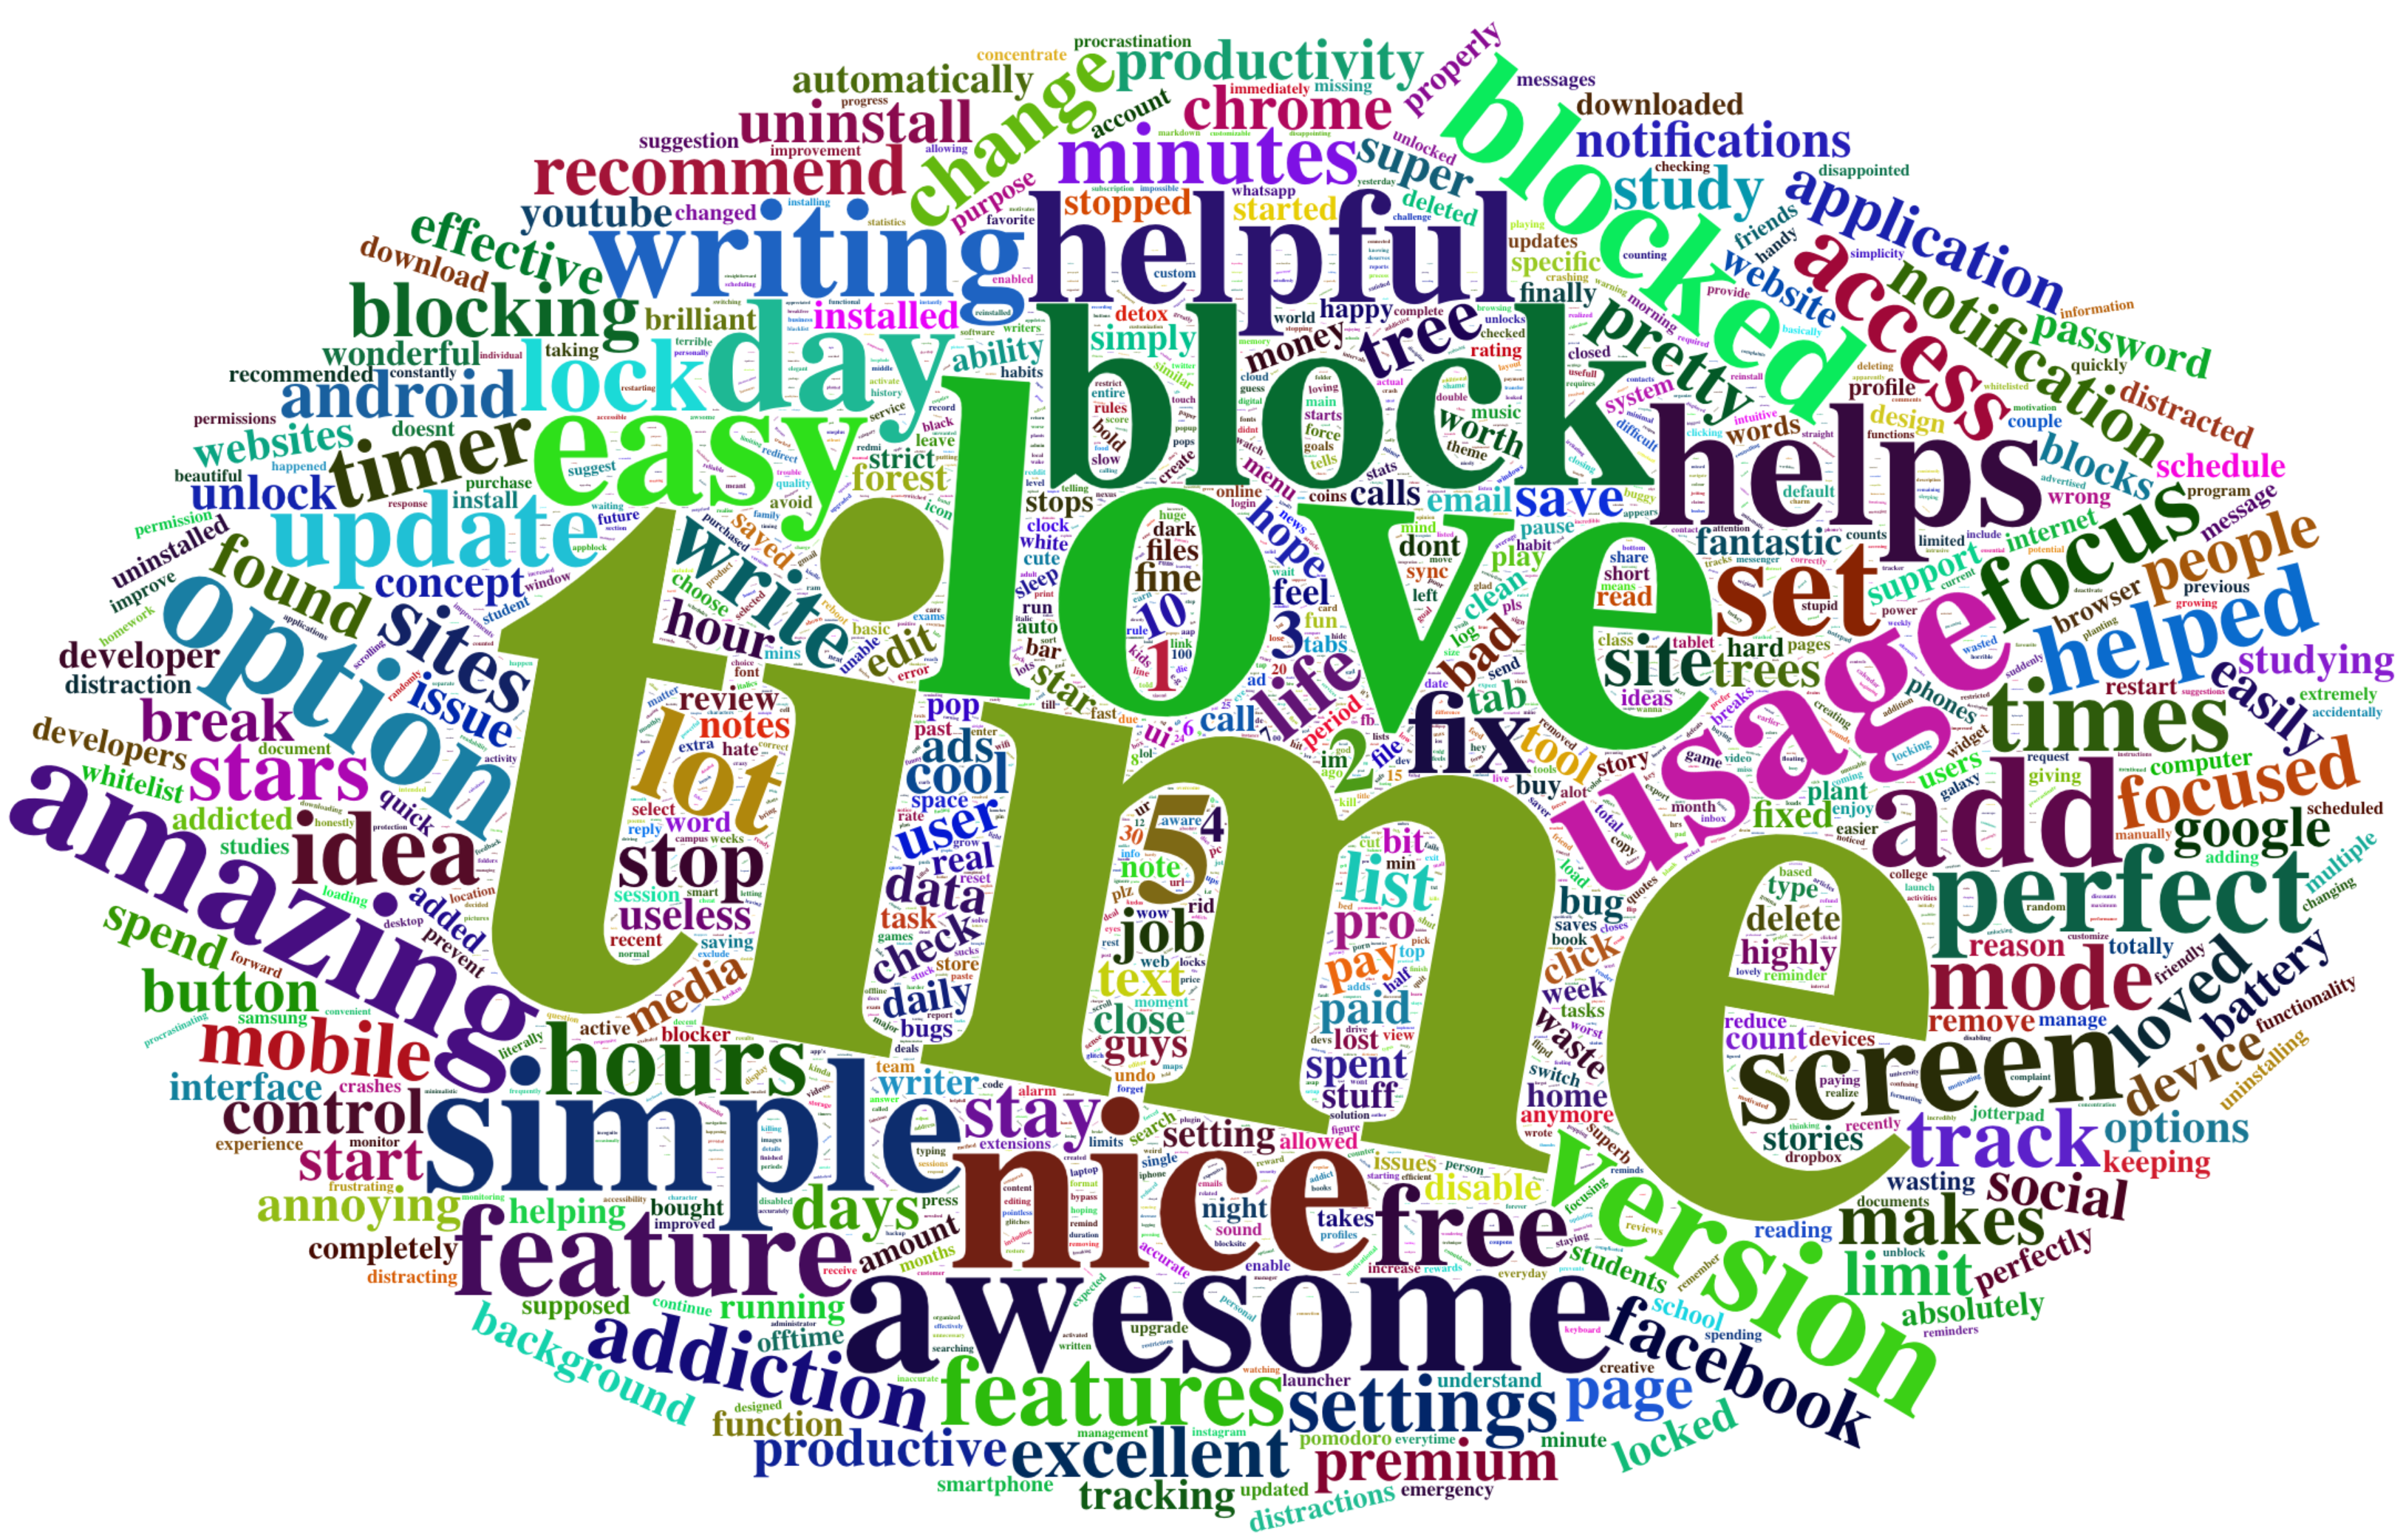 Word cloud depicting frequencies of terms across all collected reviews (excluding the terms 'app/s', 'phone', and 'extension'). Font size indicate relative frequency. Colouring is aesthetic and does not map to any characteristics of the data.